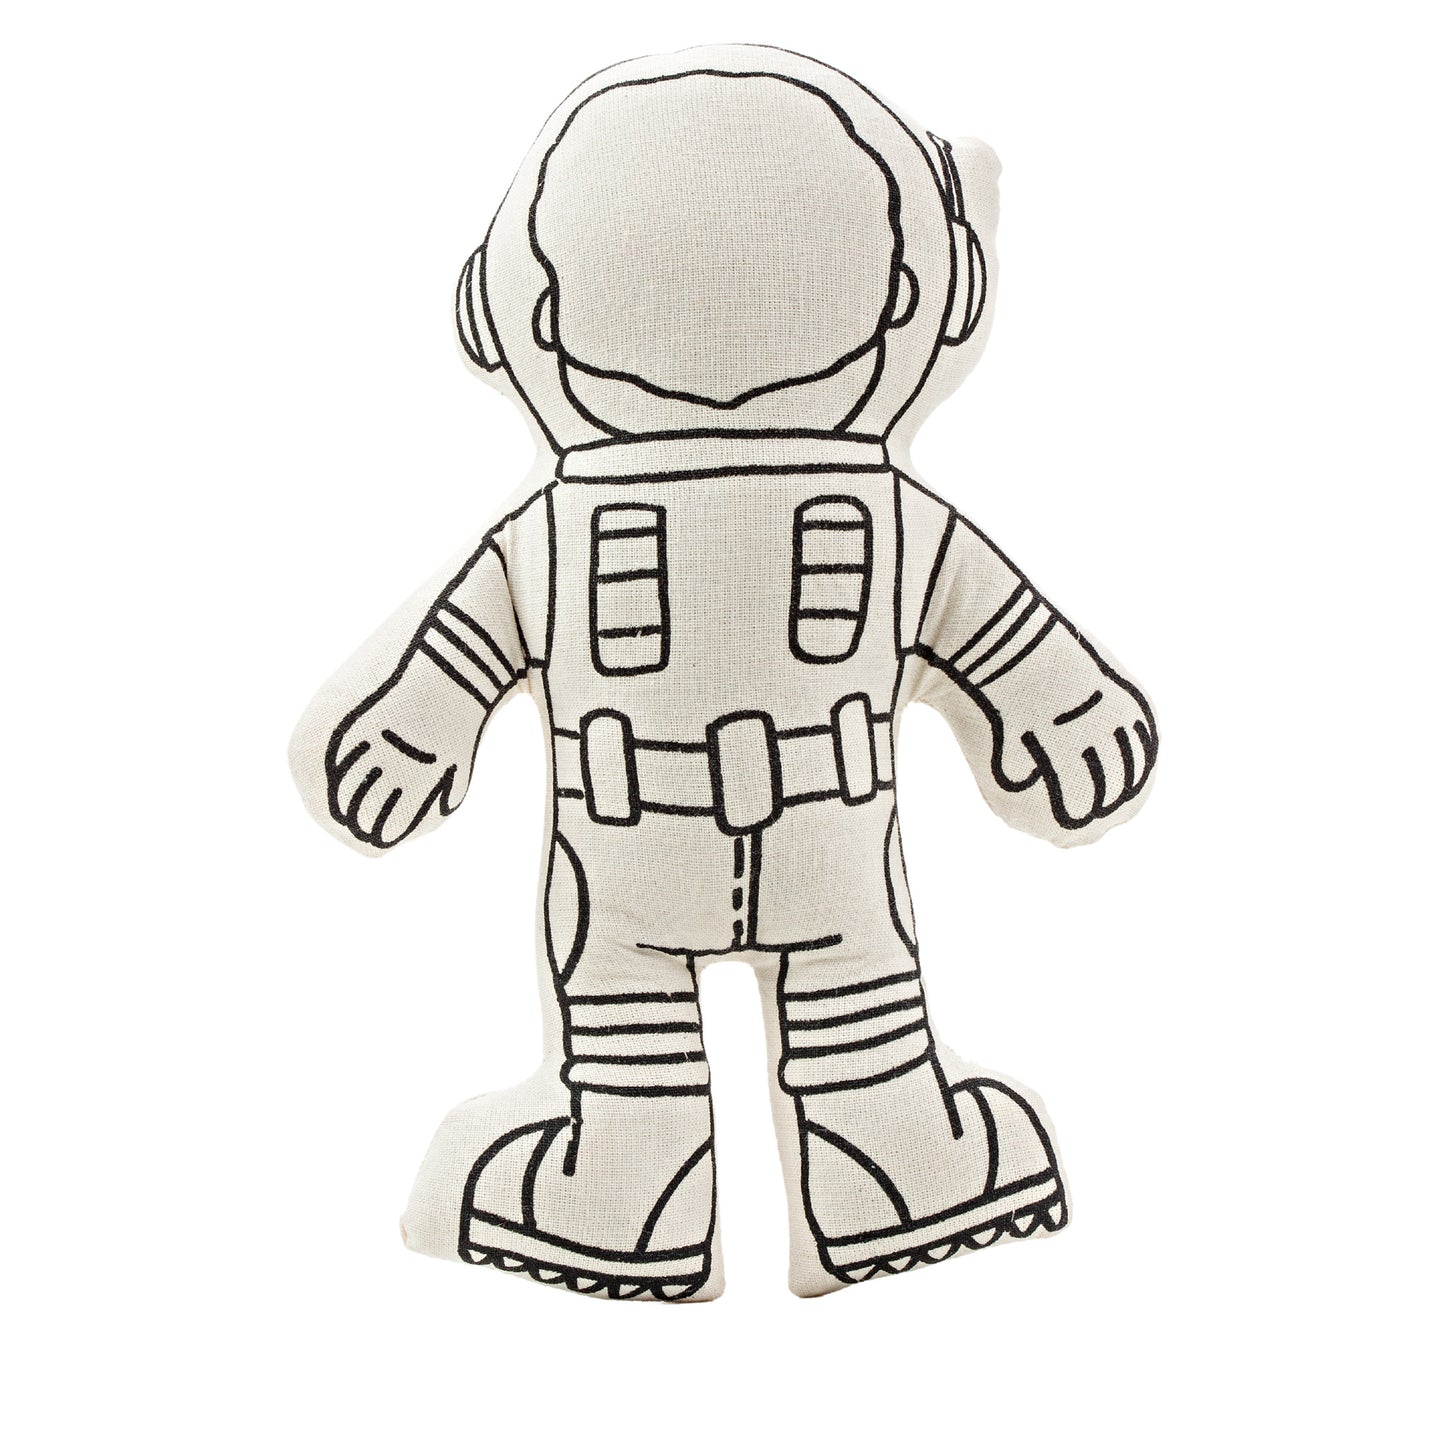 Kiboo Kids Space Explorer: Boy Astronaut Doll with Mini Space Pack - Educational and Imaginative Play Toy